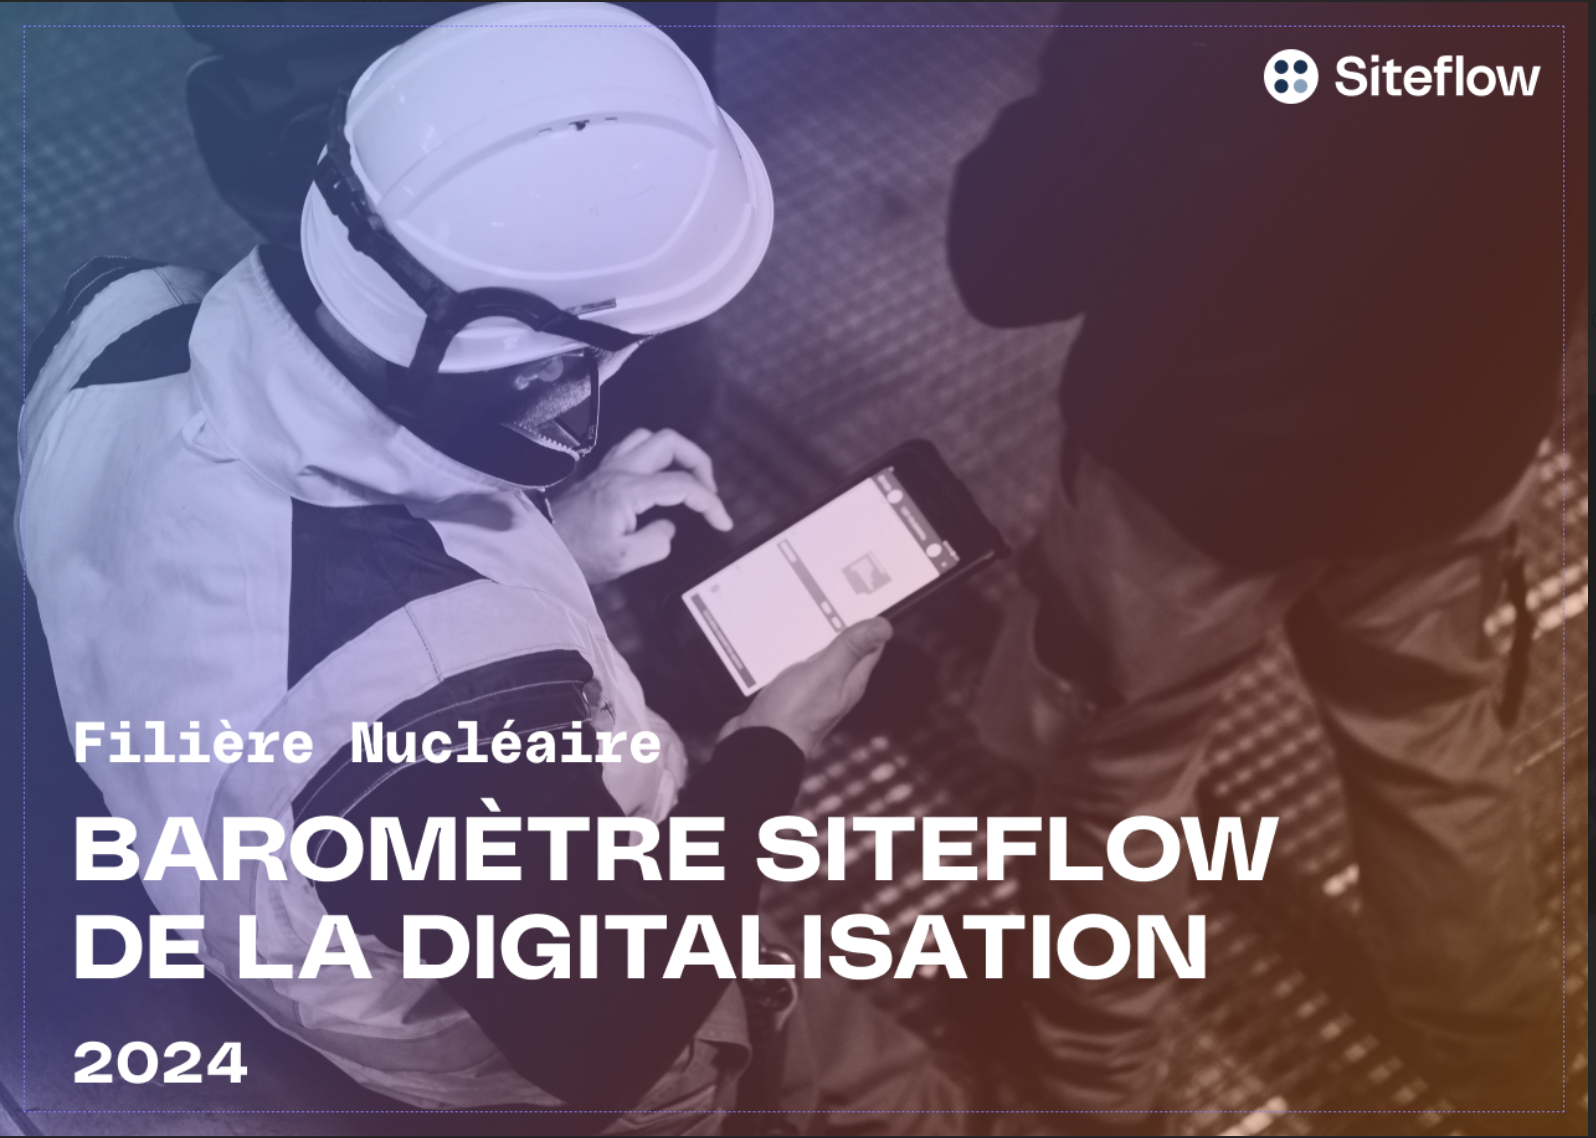 barometre-siteflow-digitalisation-filiere-nucleaire_cover